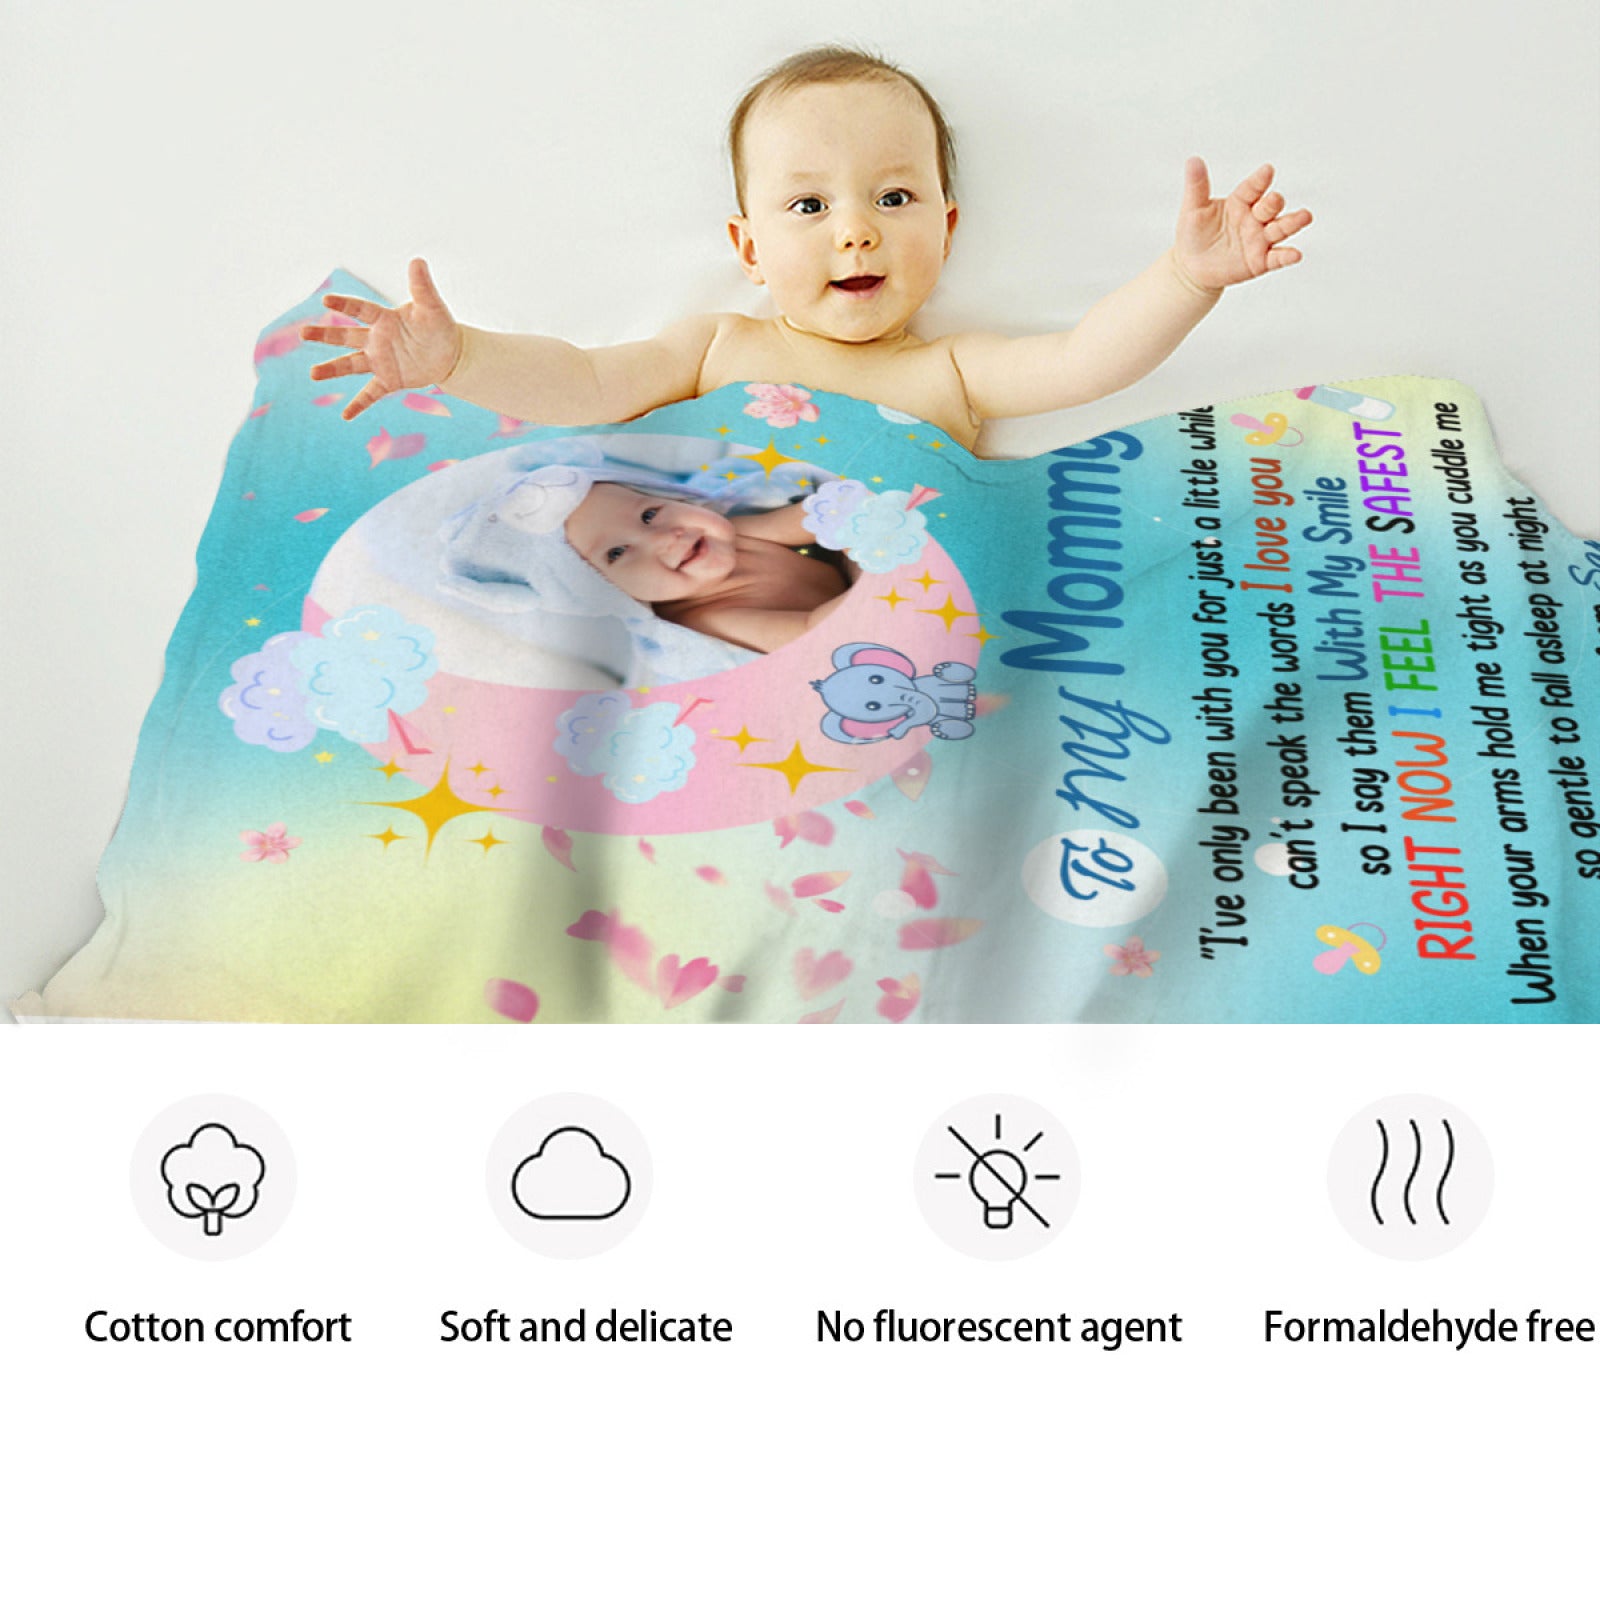 Customized Throw Blankets with Baby Picture and Name, Personalized Blanket with Photo Gifts for Mom Newborn Shower - colorfulcustom